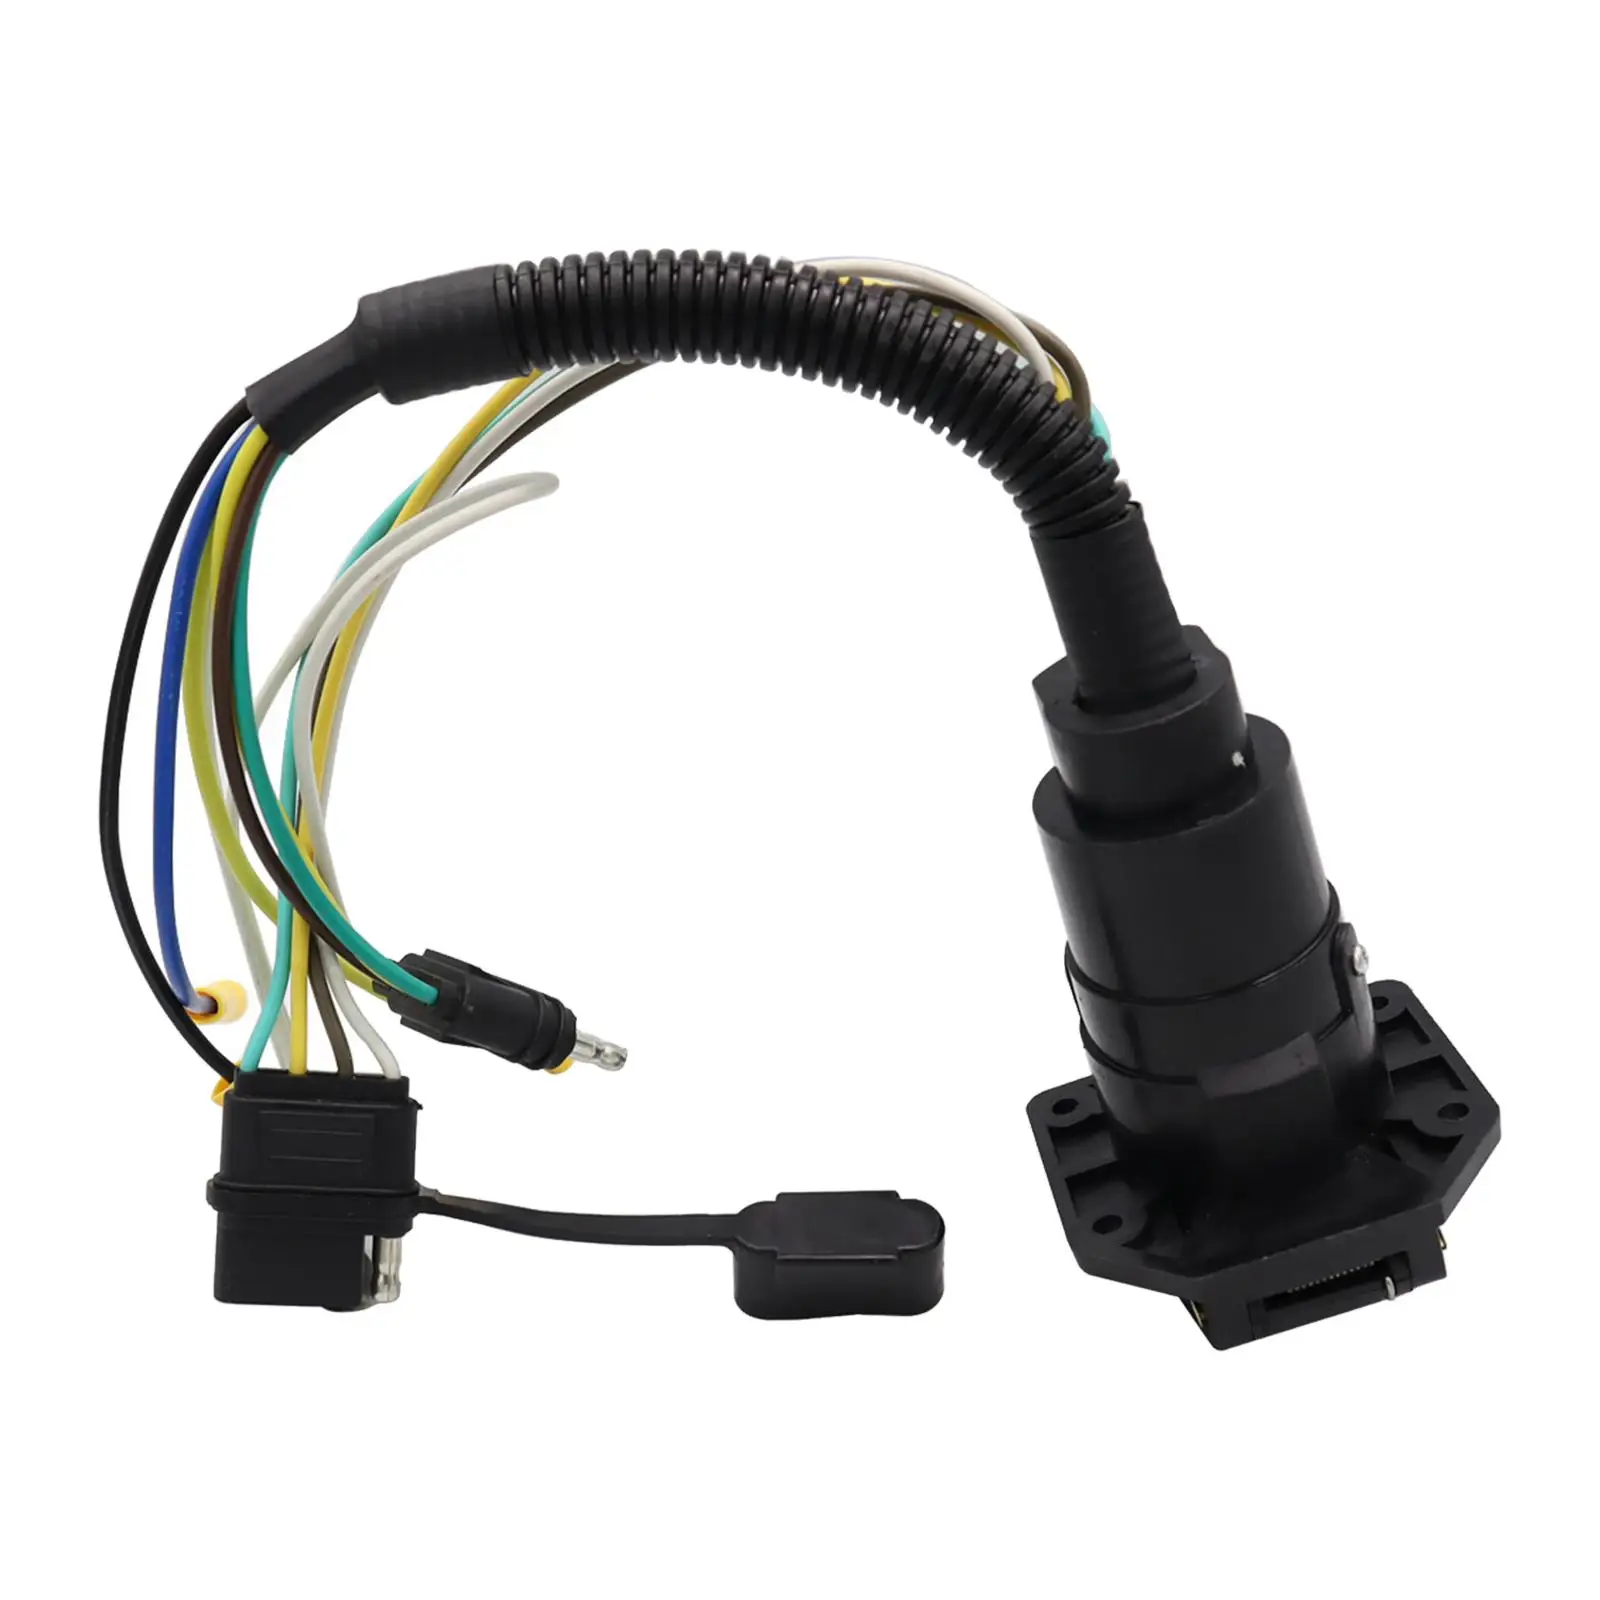 Adapter Connector Kit Direct Replaces Professional Durable for Caravan